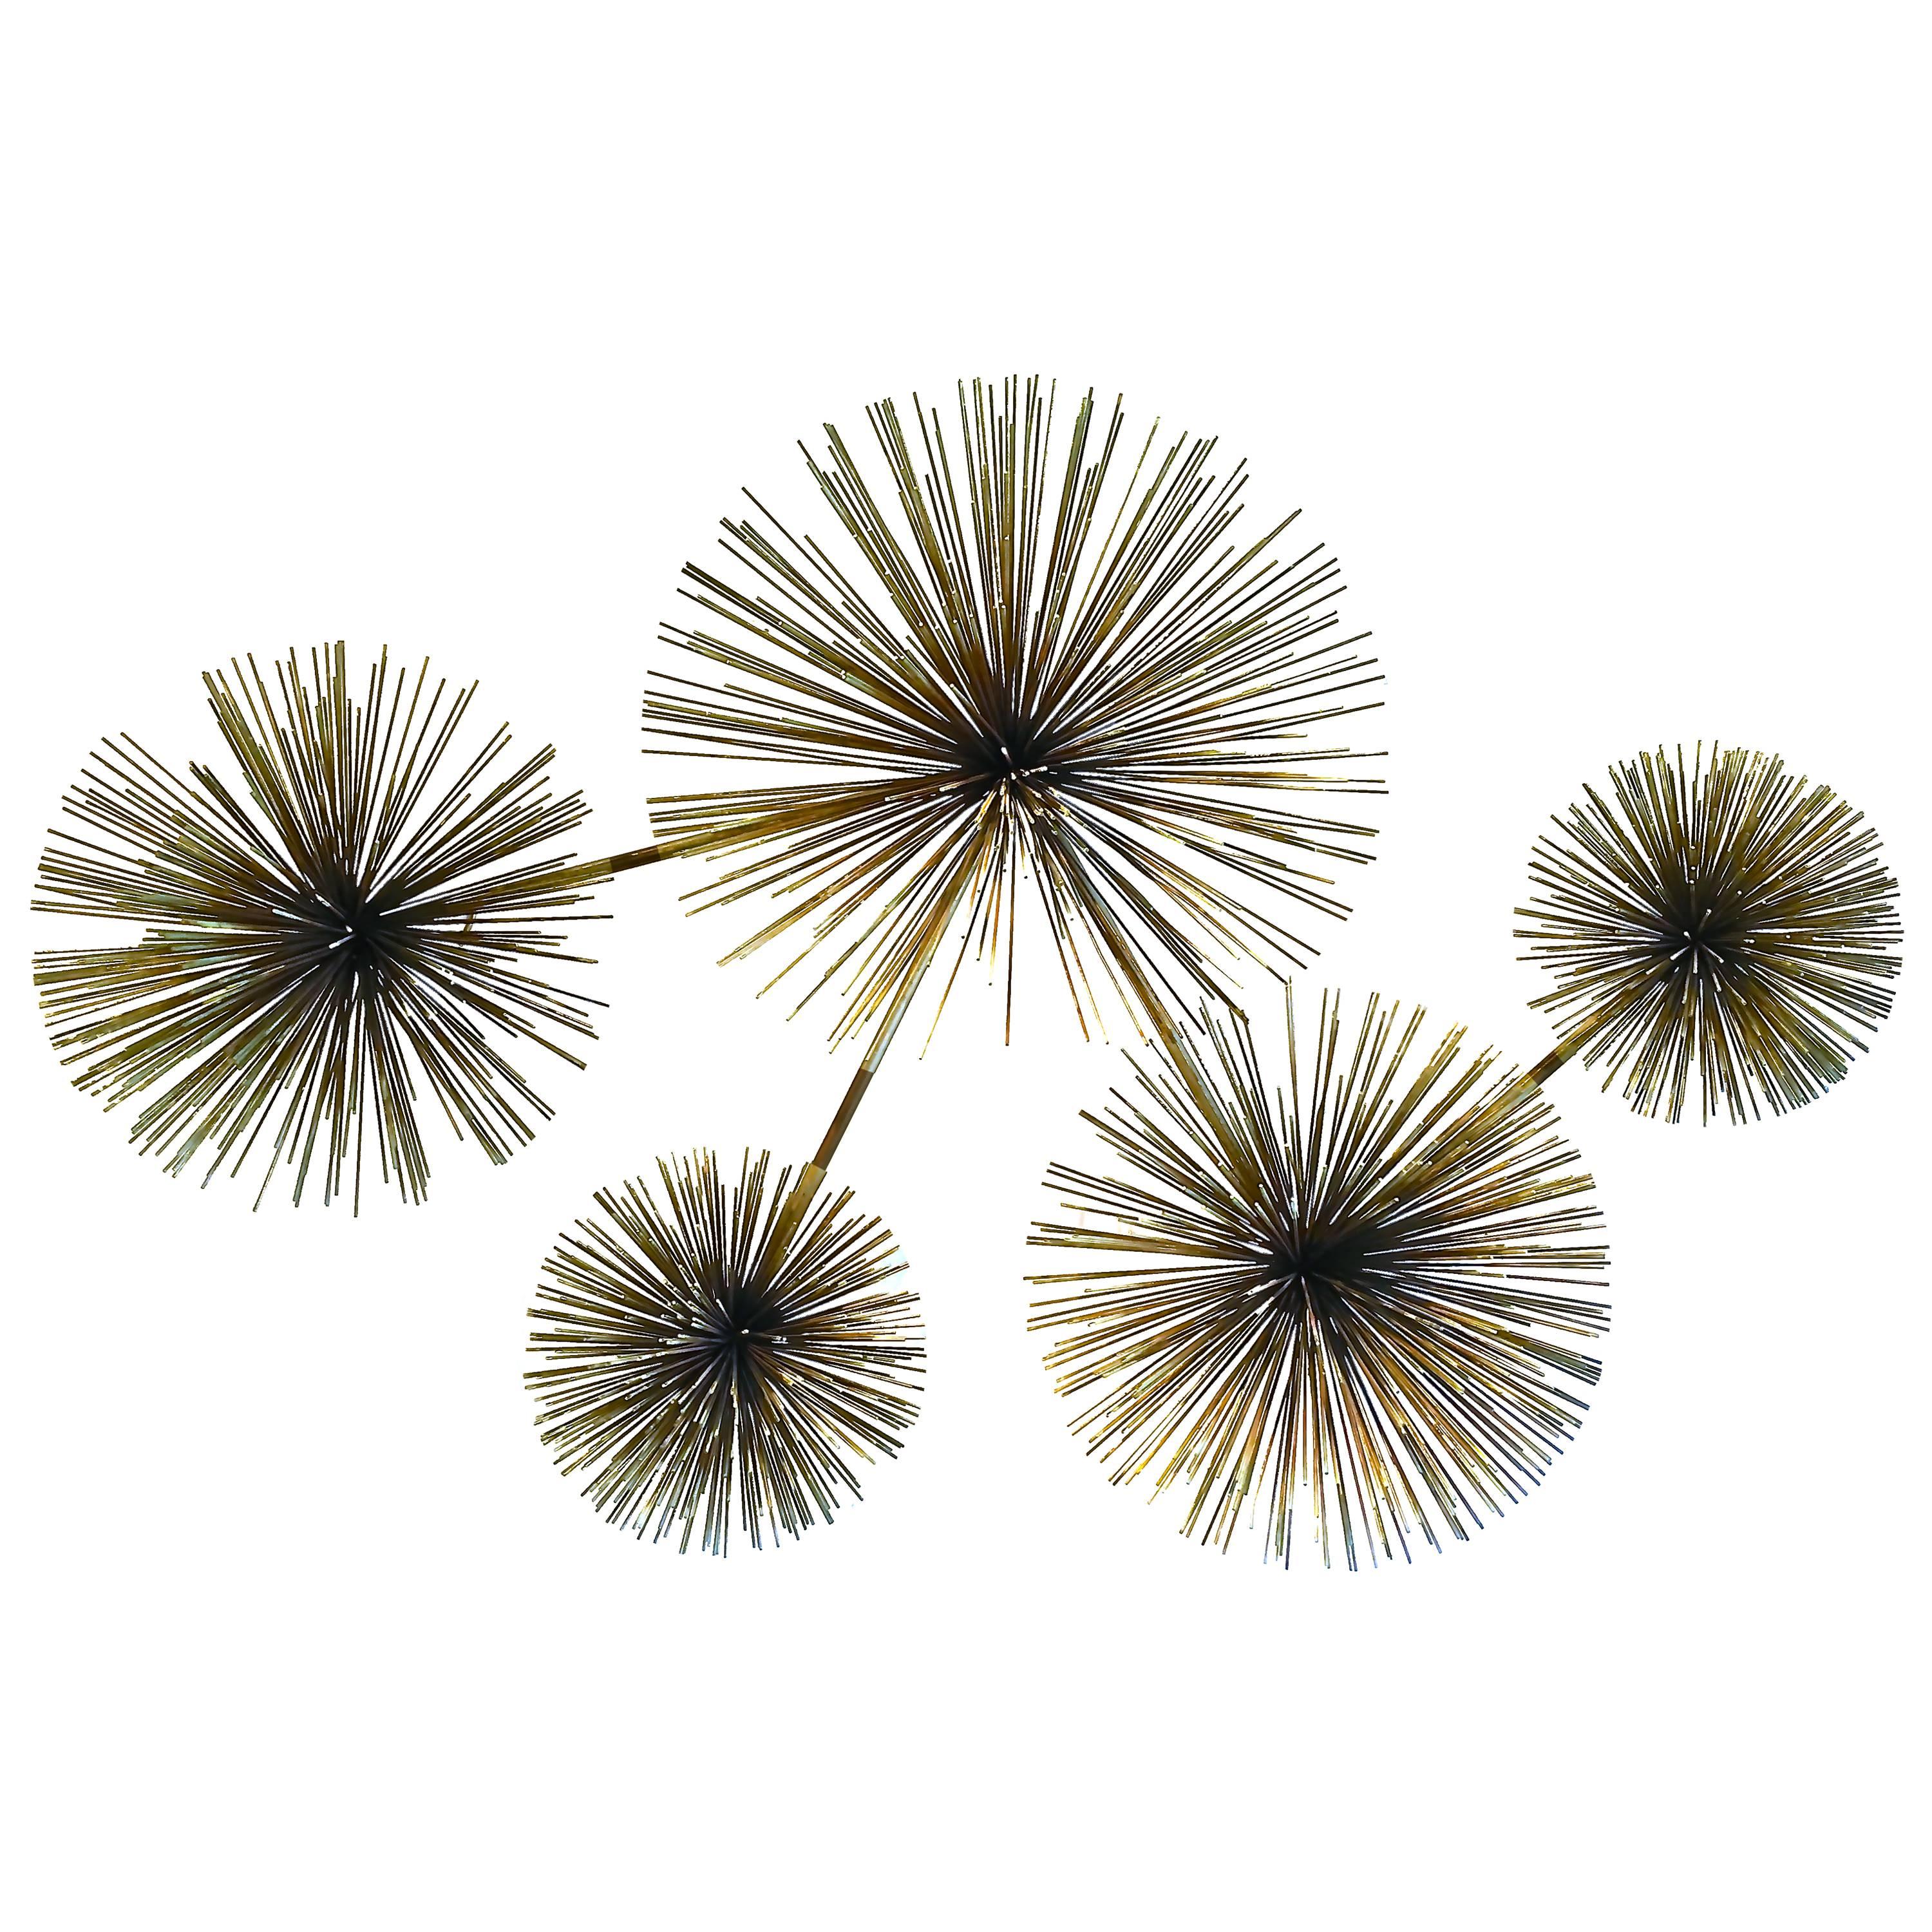 Curtis Jere Sculpture Oursin Aka "Pom Pom" Wall Sculpture in Solid Brass